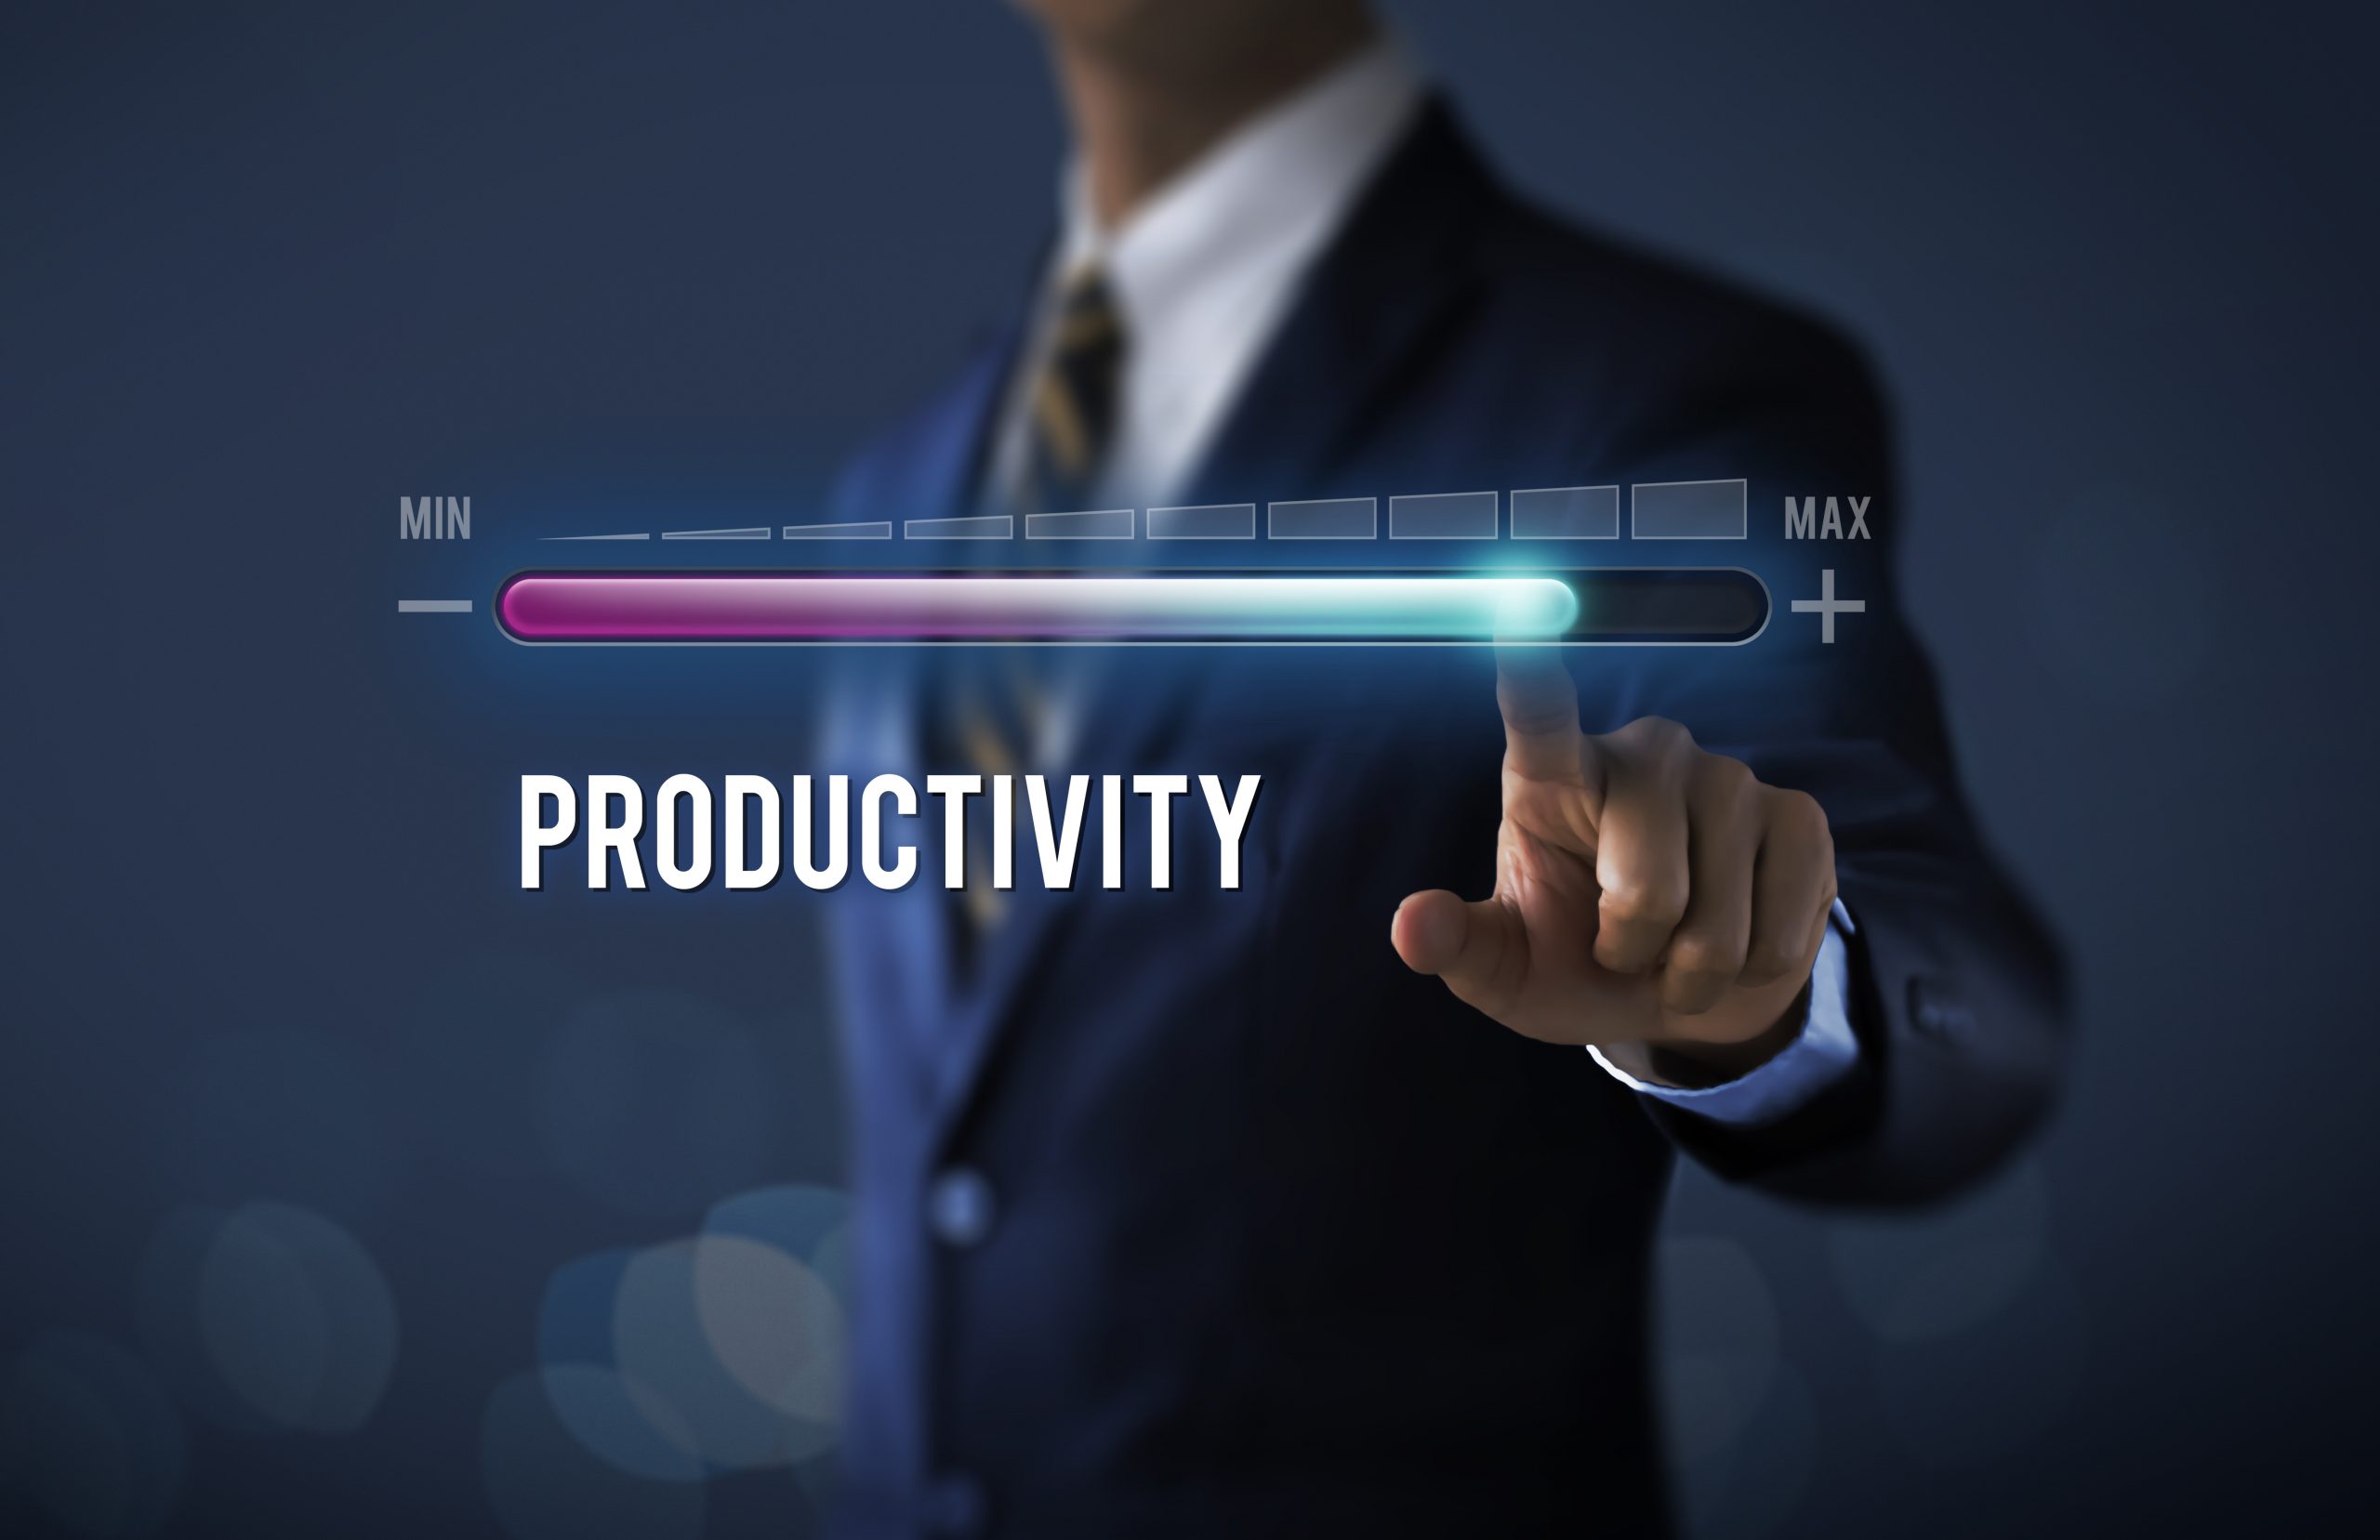 Increase productivity concept. Businessman is pulling up progress bar with the word PRODUCTIVITY on dark tone background.